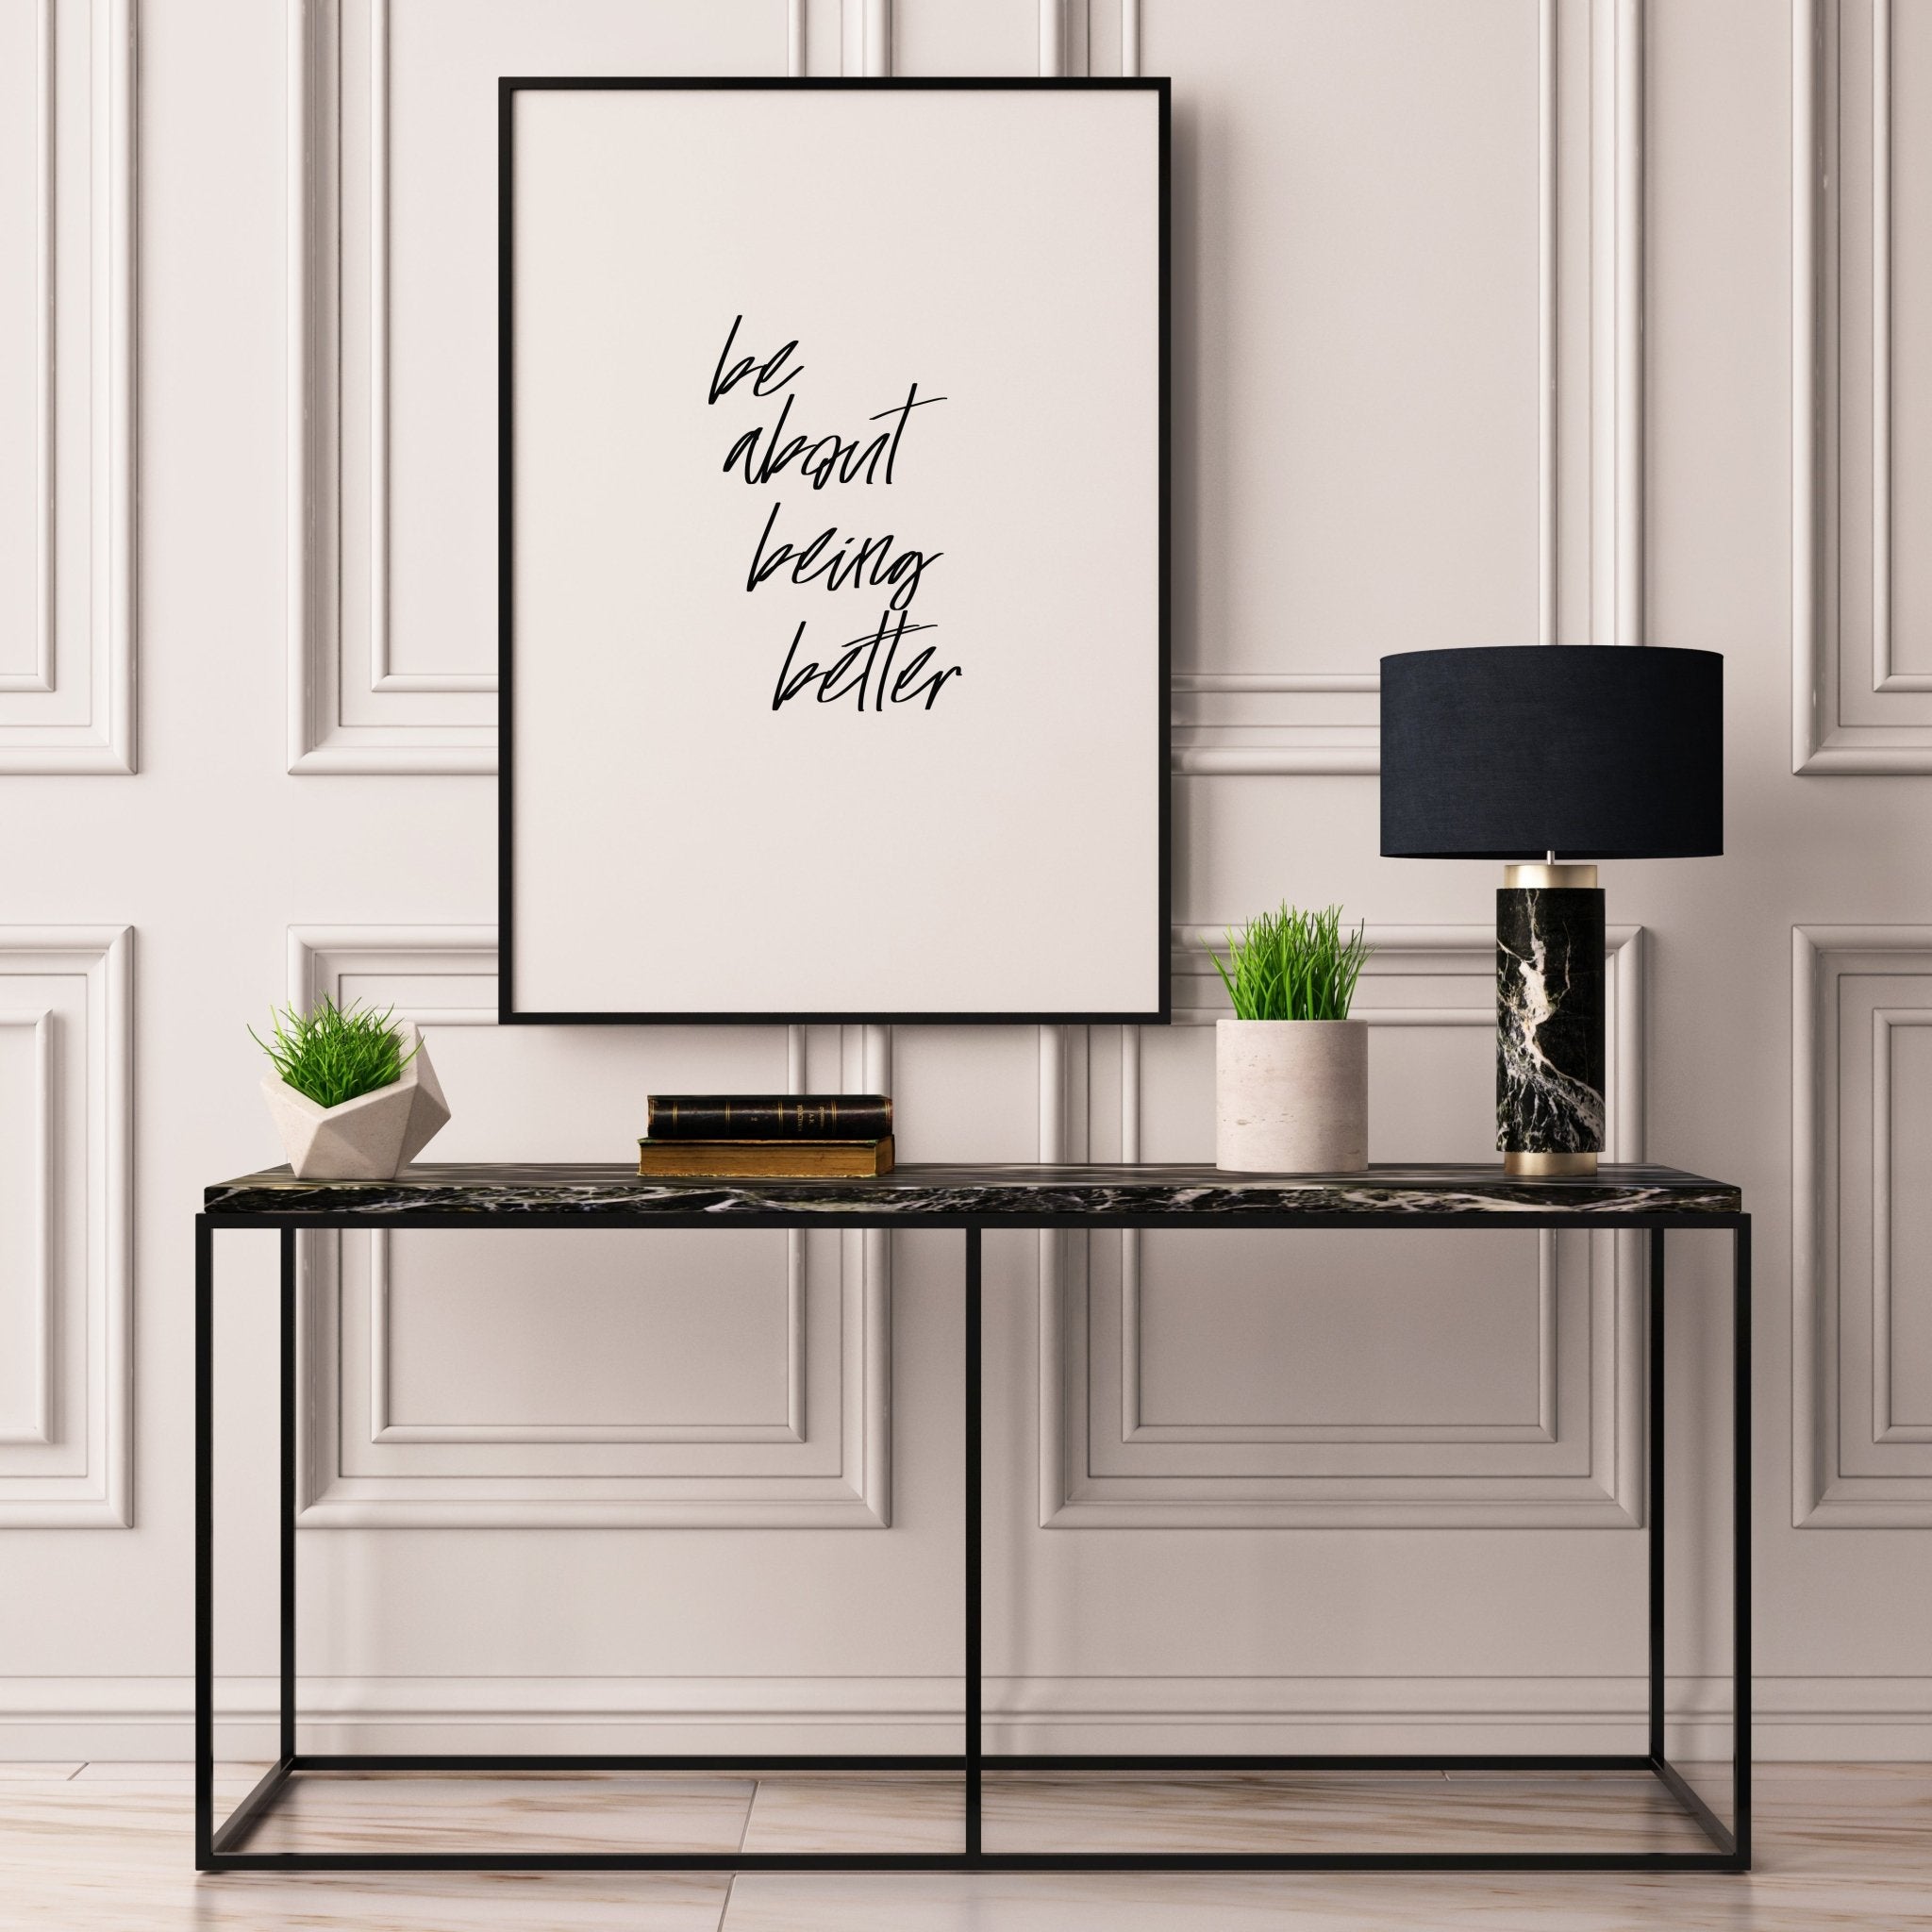 Be About Being Better - D'Luxe Prints